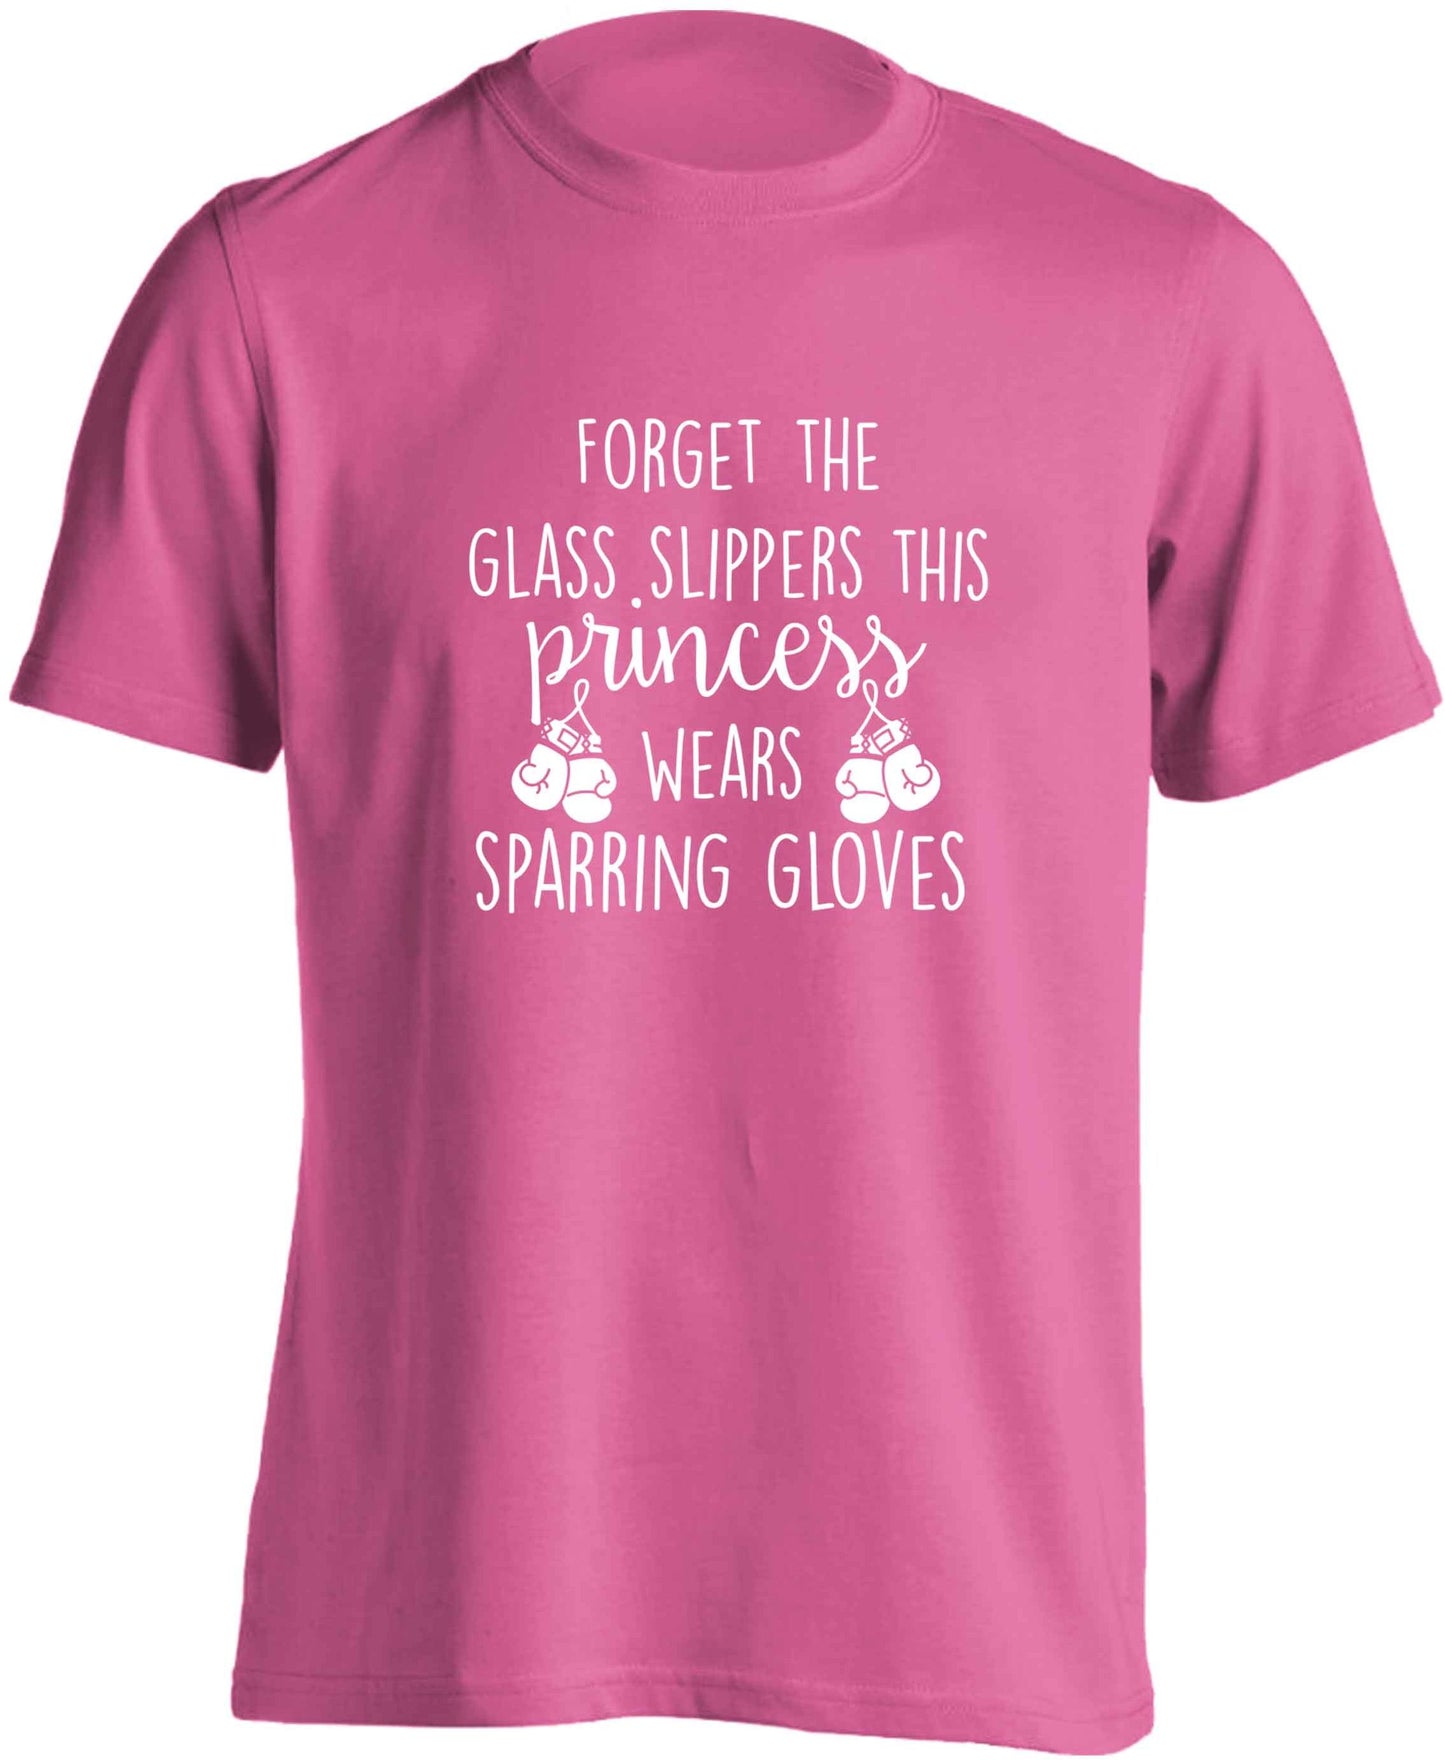 Forget the glass slippers this princess wears sparring gloves adults unisex pink Tshirt 2XL